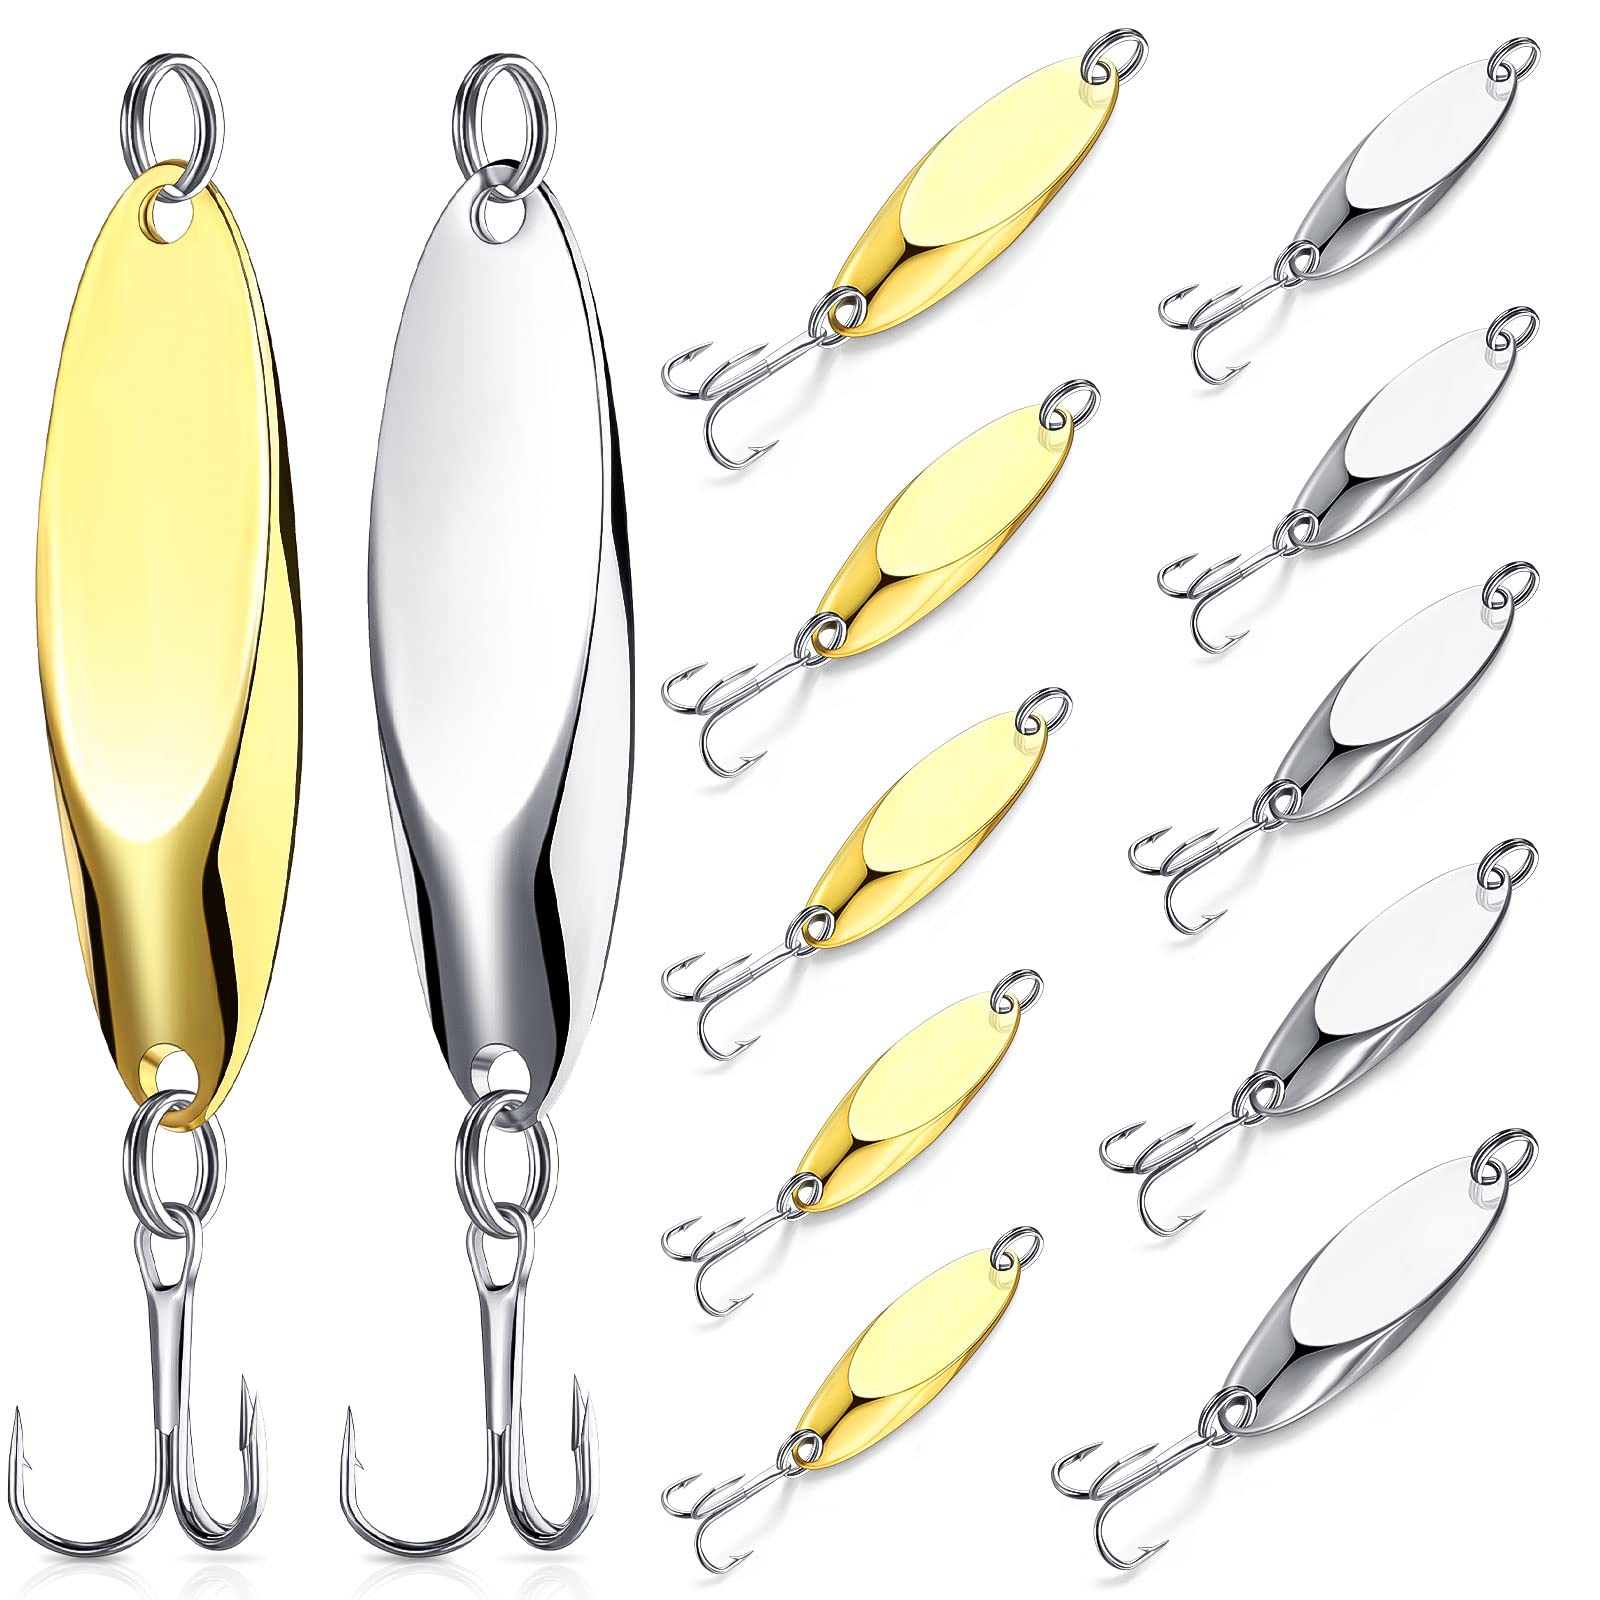 Cheap Fishing Spoons Lures Spots Pattern With Treble Hooks Anti